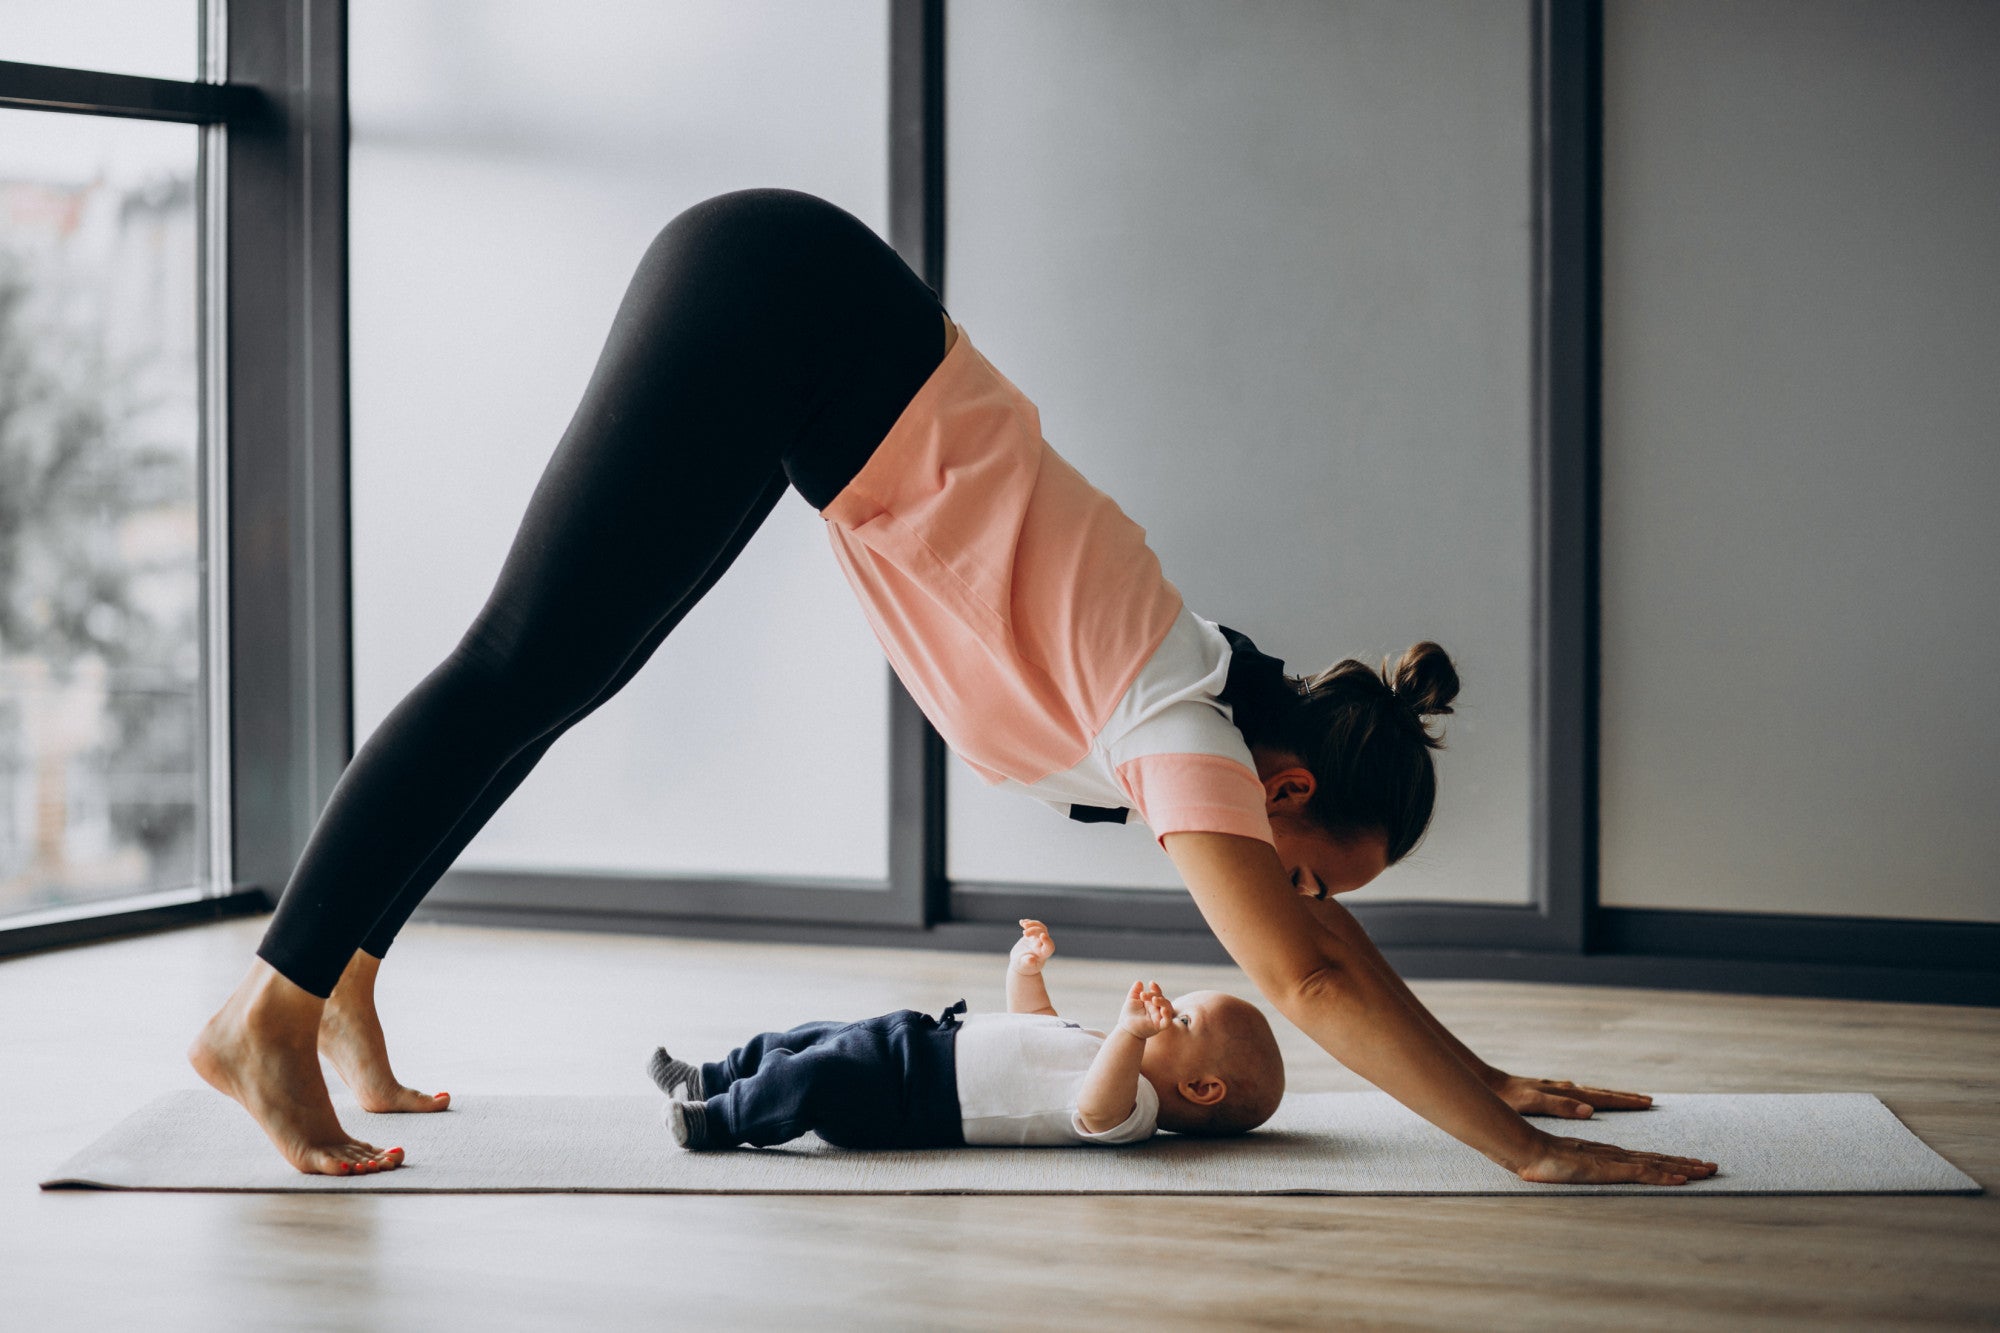 Yoga for Women Health: Supporting Wellness Throughout Life - Gentle yoga poses and practices for the postpartum period